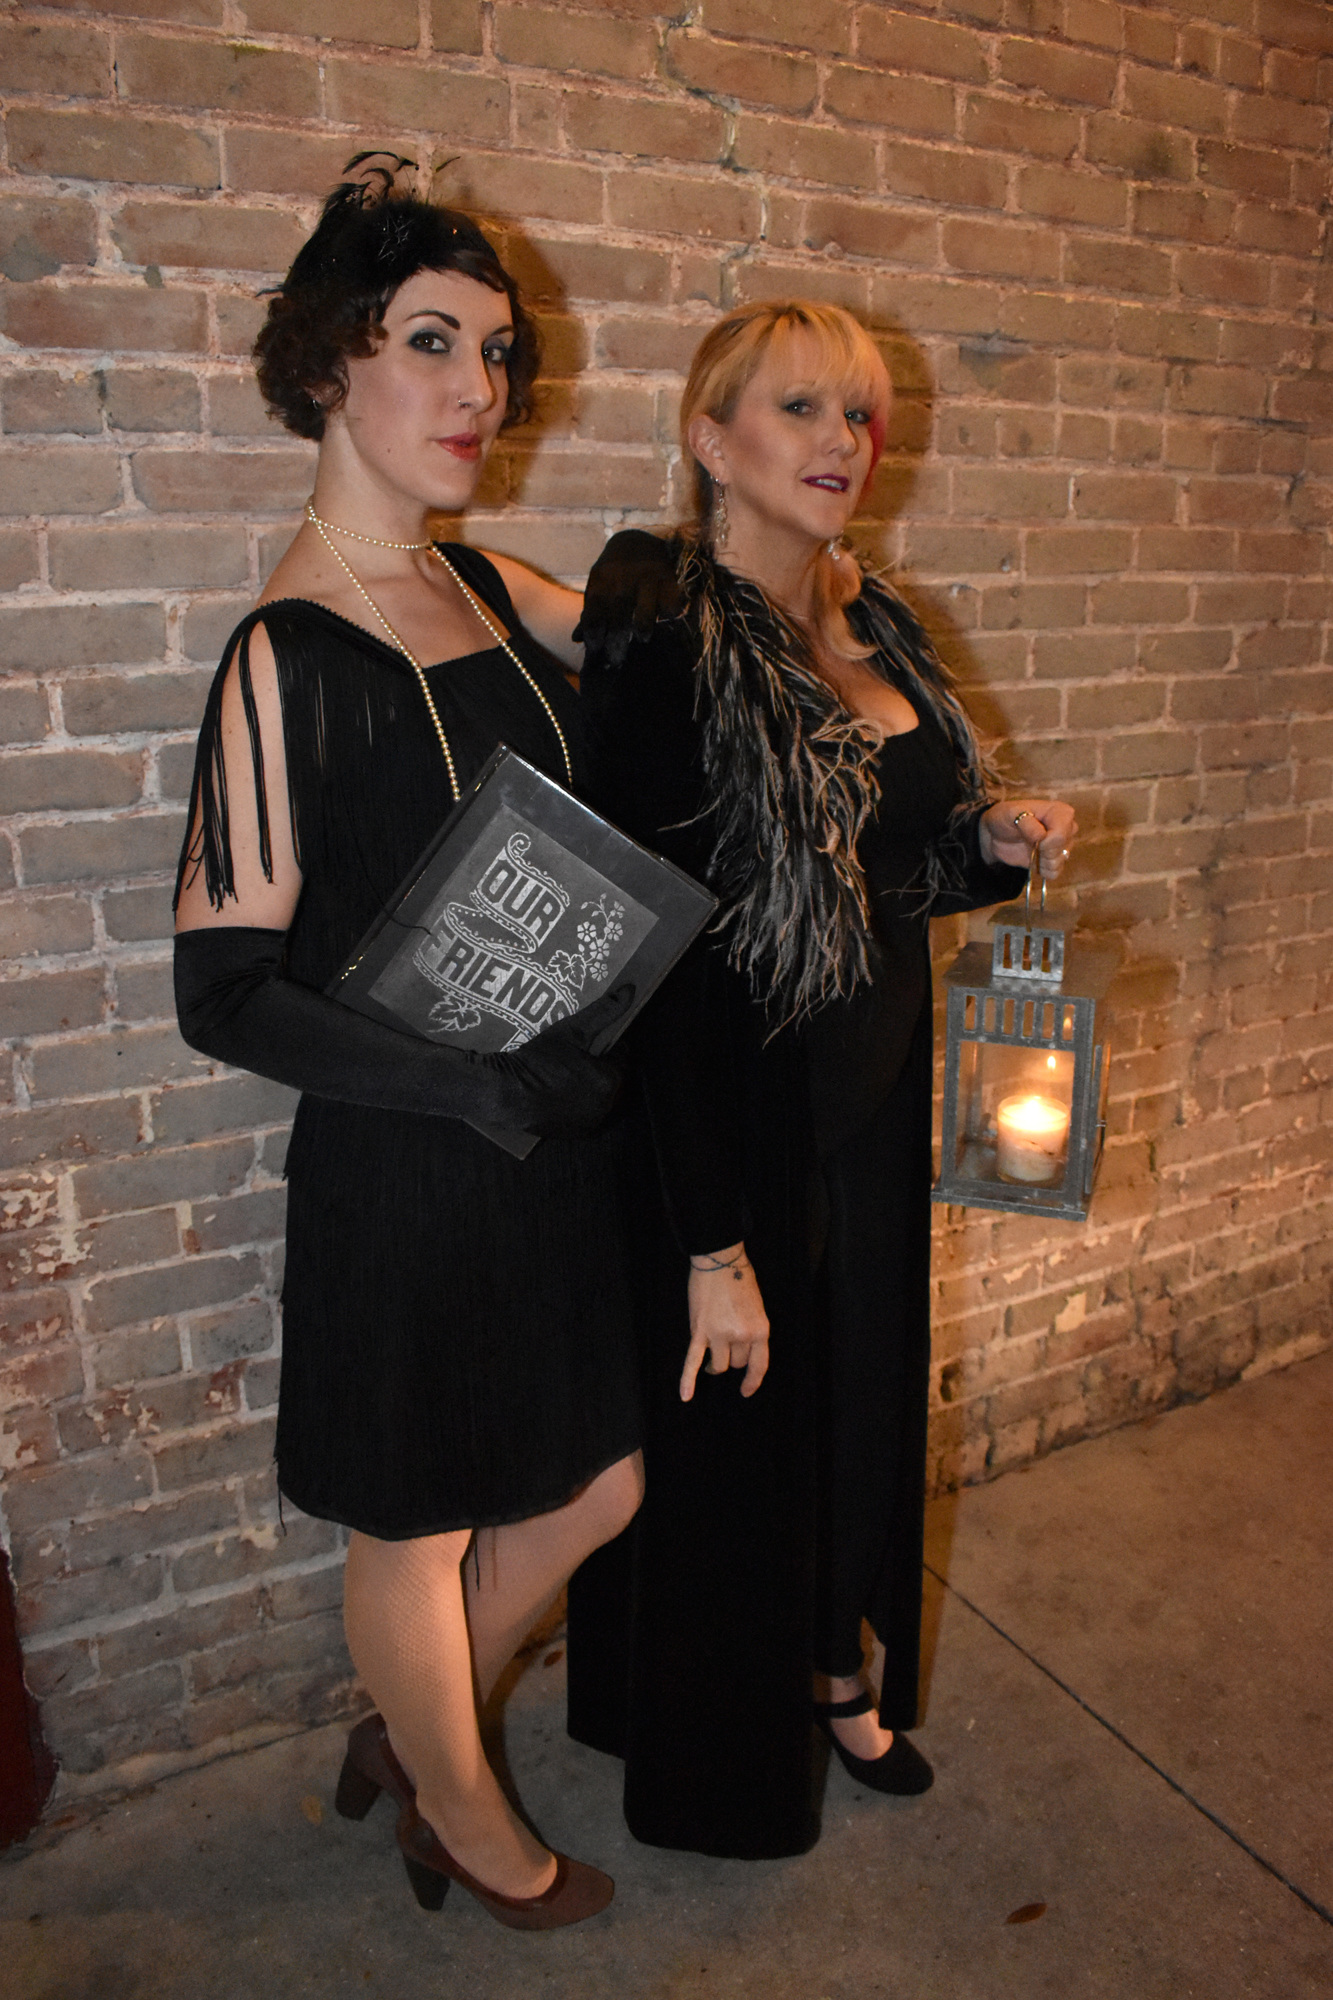 Sarafina Murphy-Gibson and Laura Daniel Gale dress in prohibition-era decor for their tours to honor what they believe was the city's heyday. Photo by Niki Kottmann